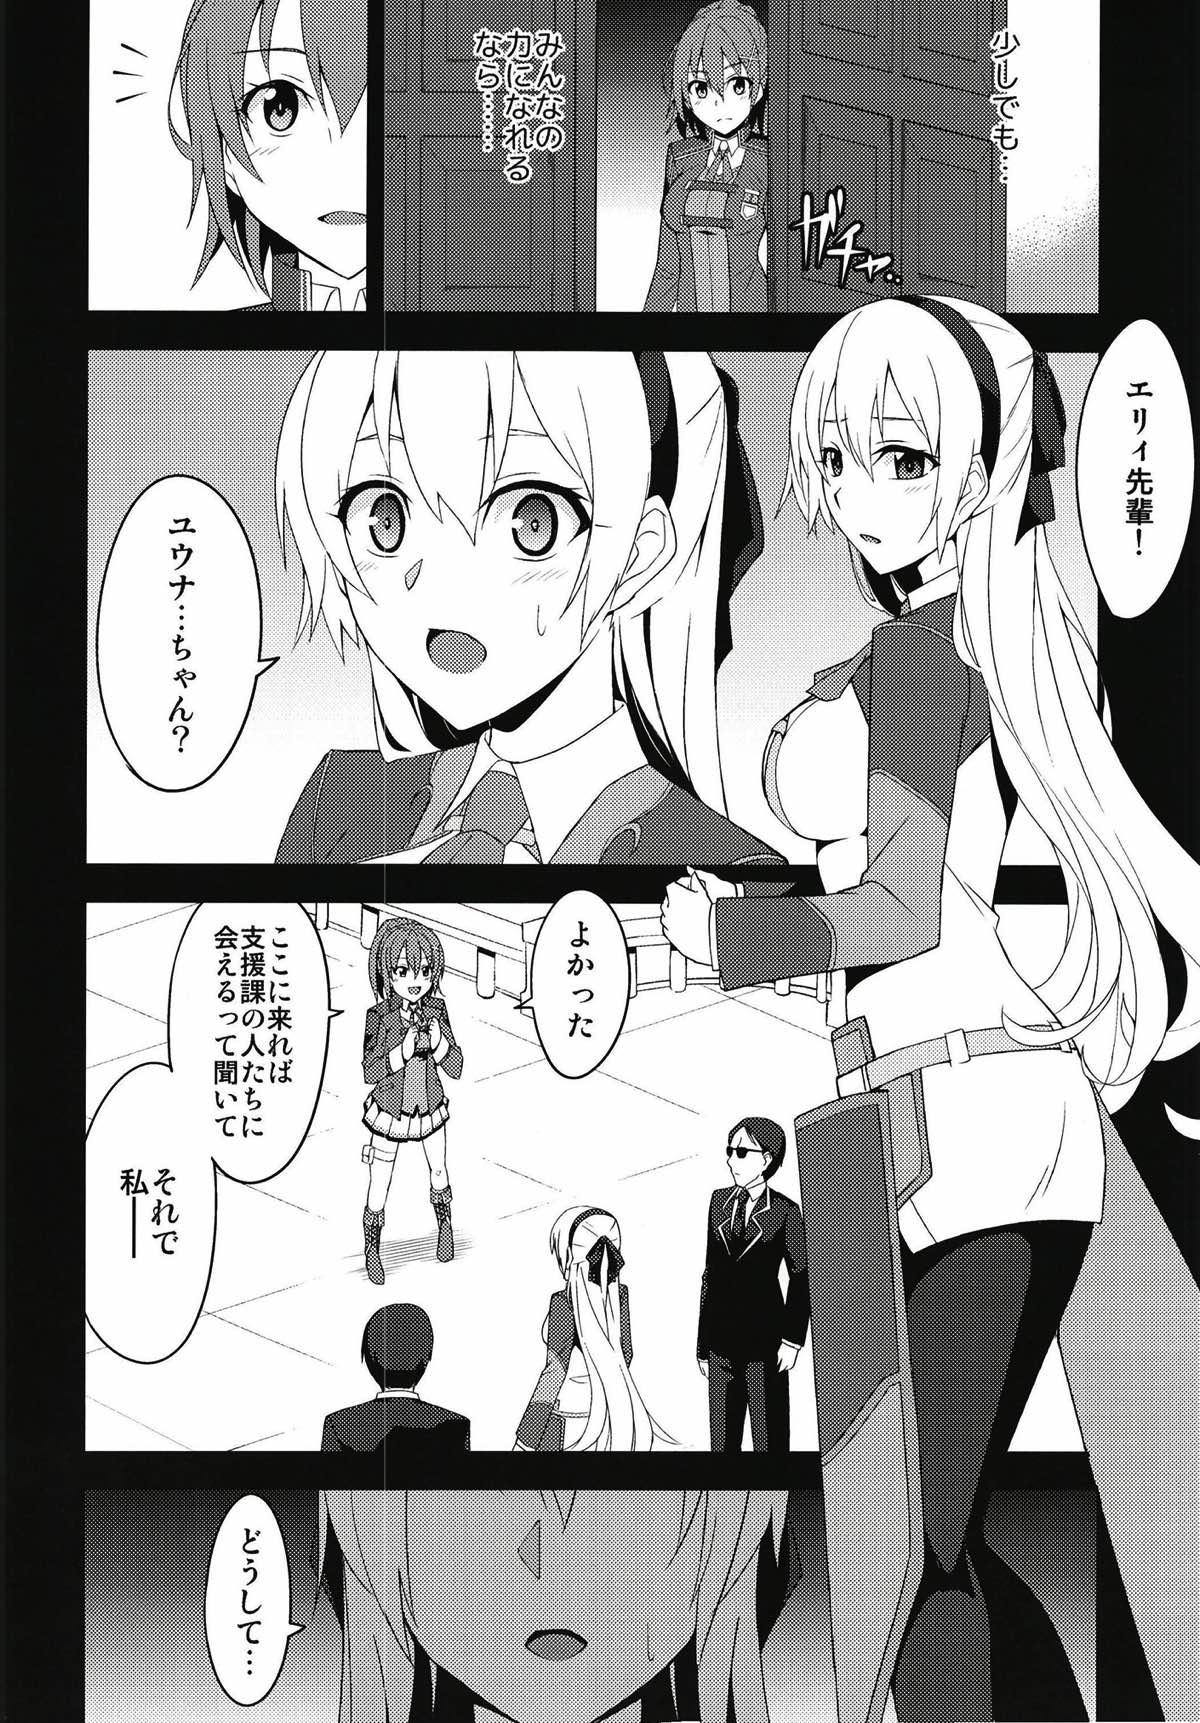 Massages Torikago no Yoru - The legend of heroes Cosplay - Page 5